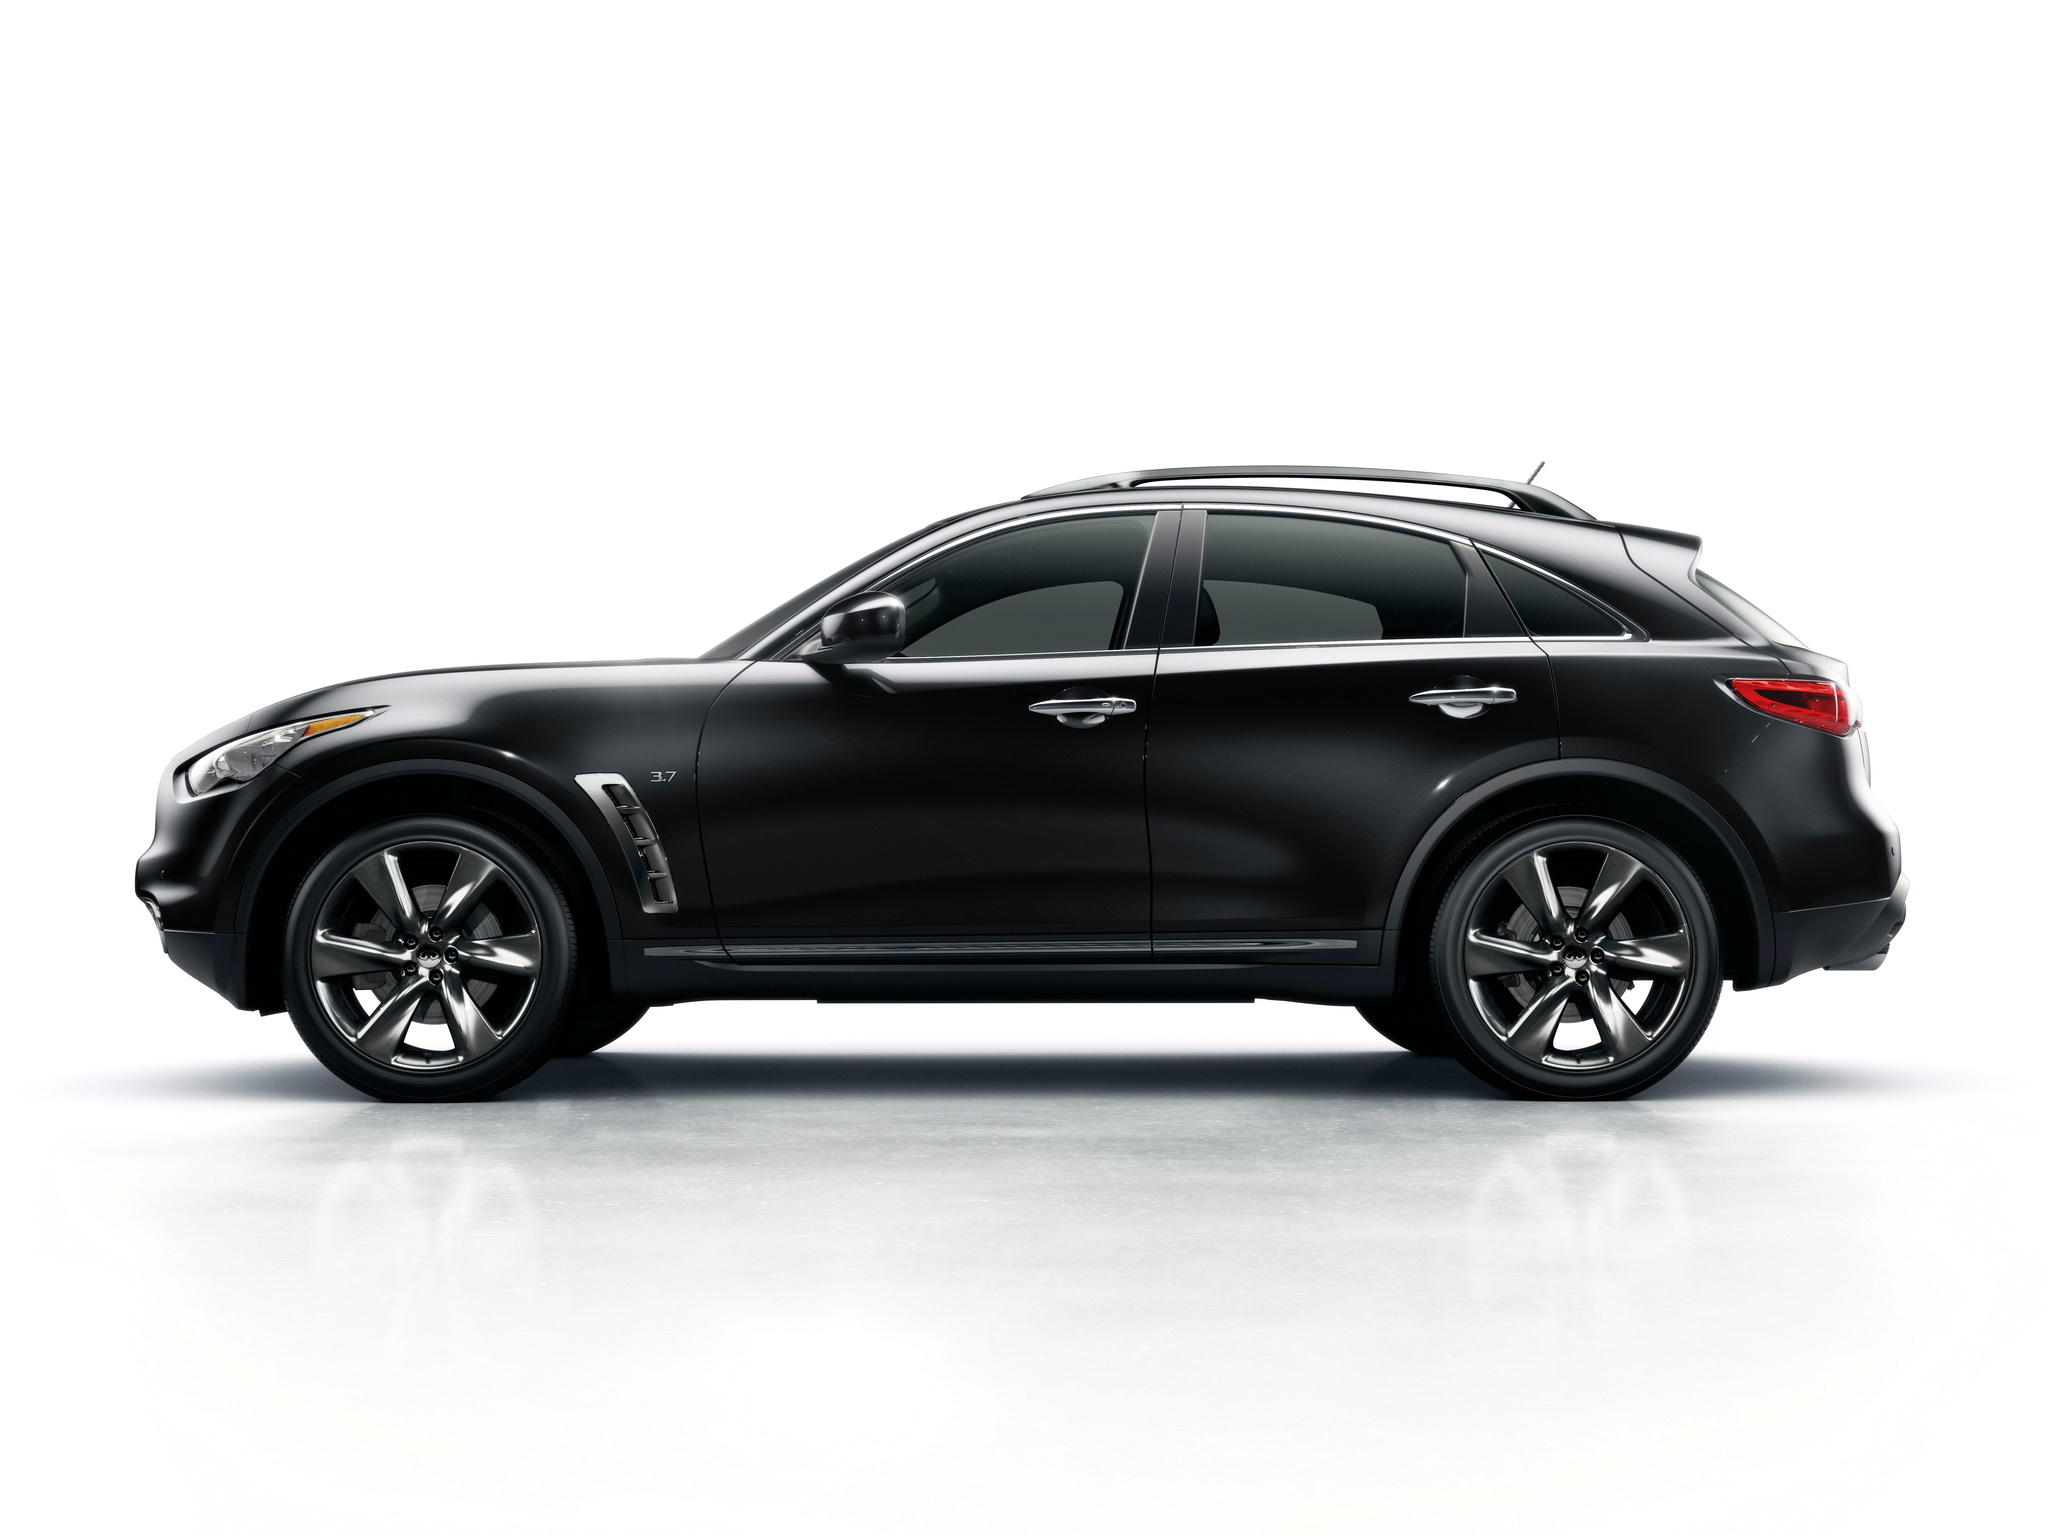 Infiniti QX70 Discontinued, Replacement Expected In 2021 Or 2022 -  autoevolution